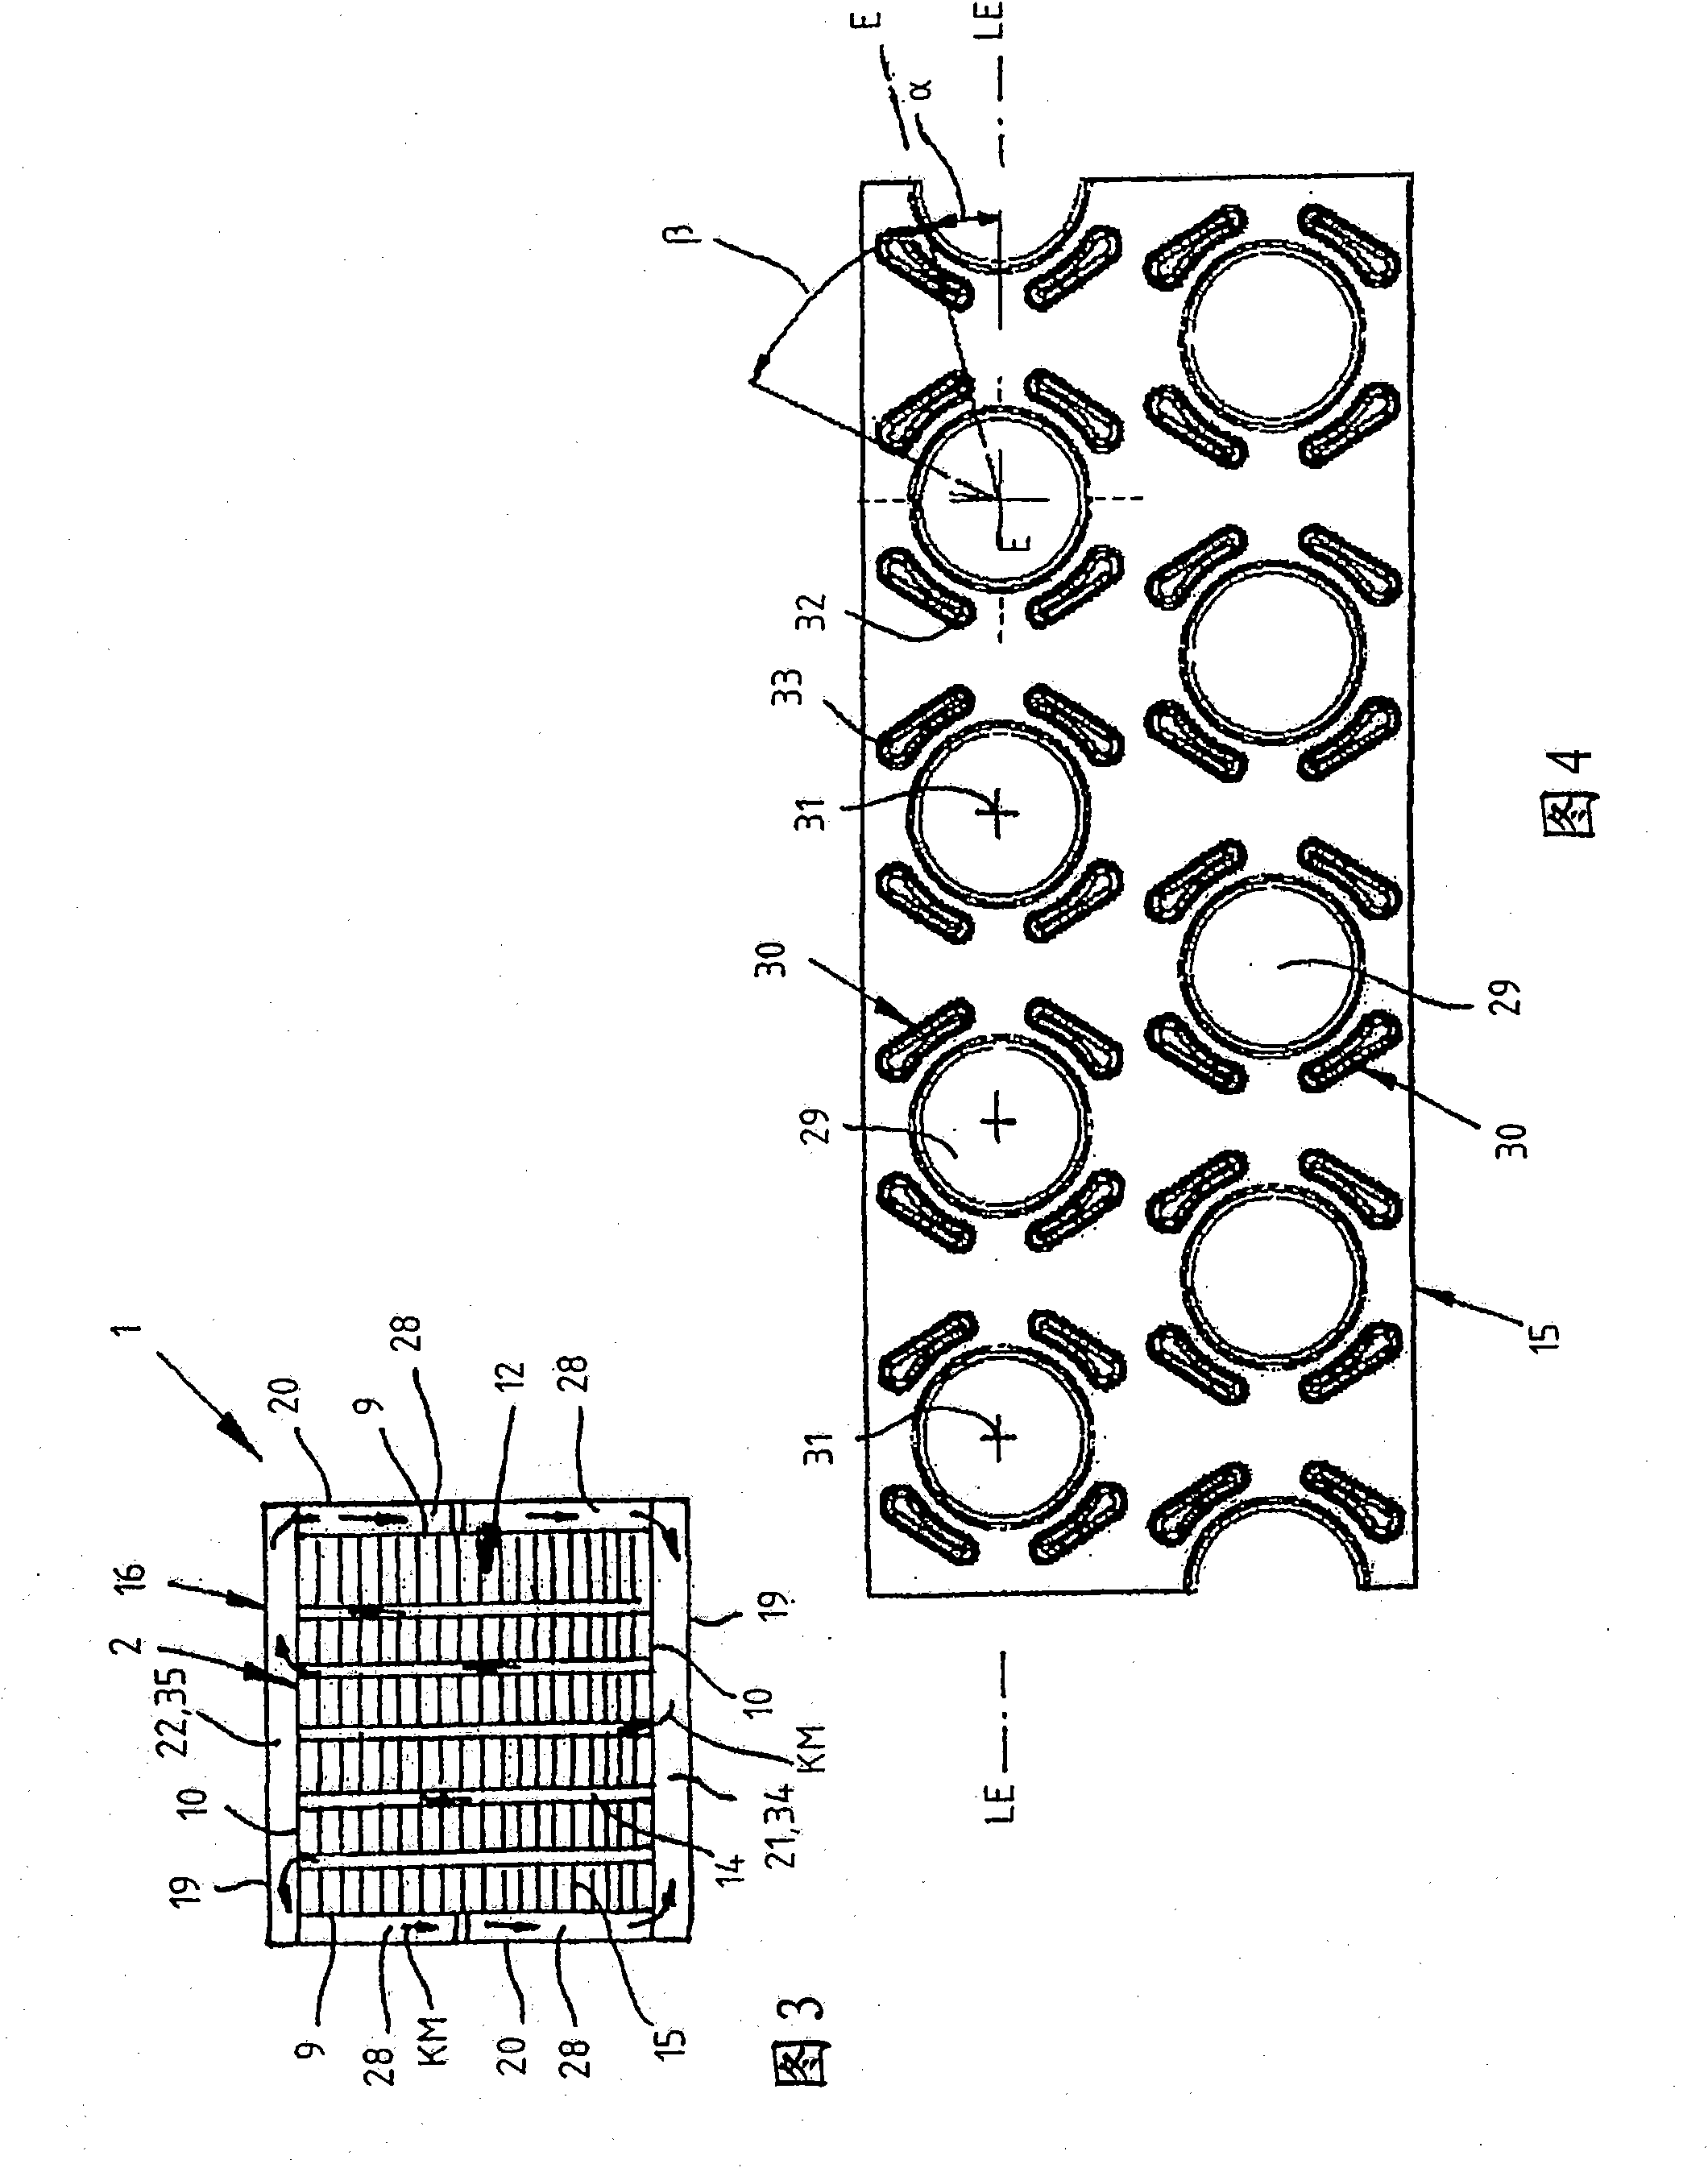 Exhaust gas recirculation cooling element for an internal combustion engine